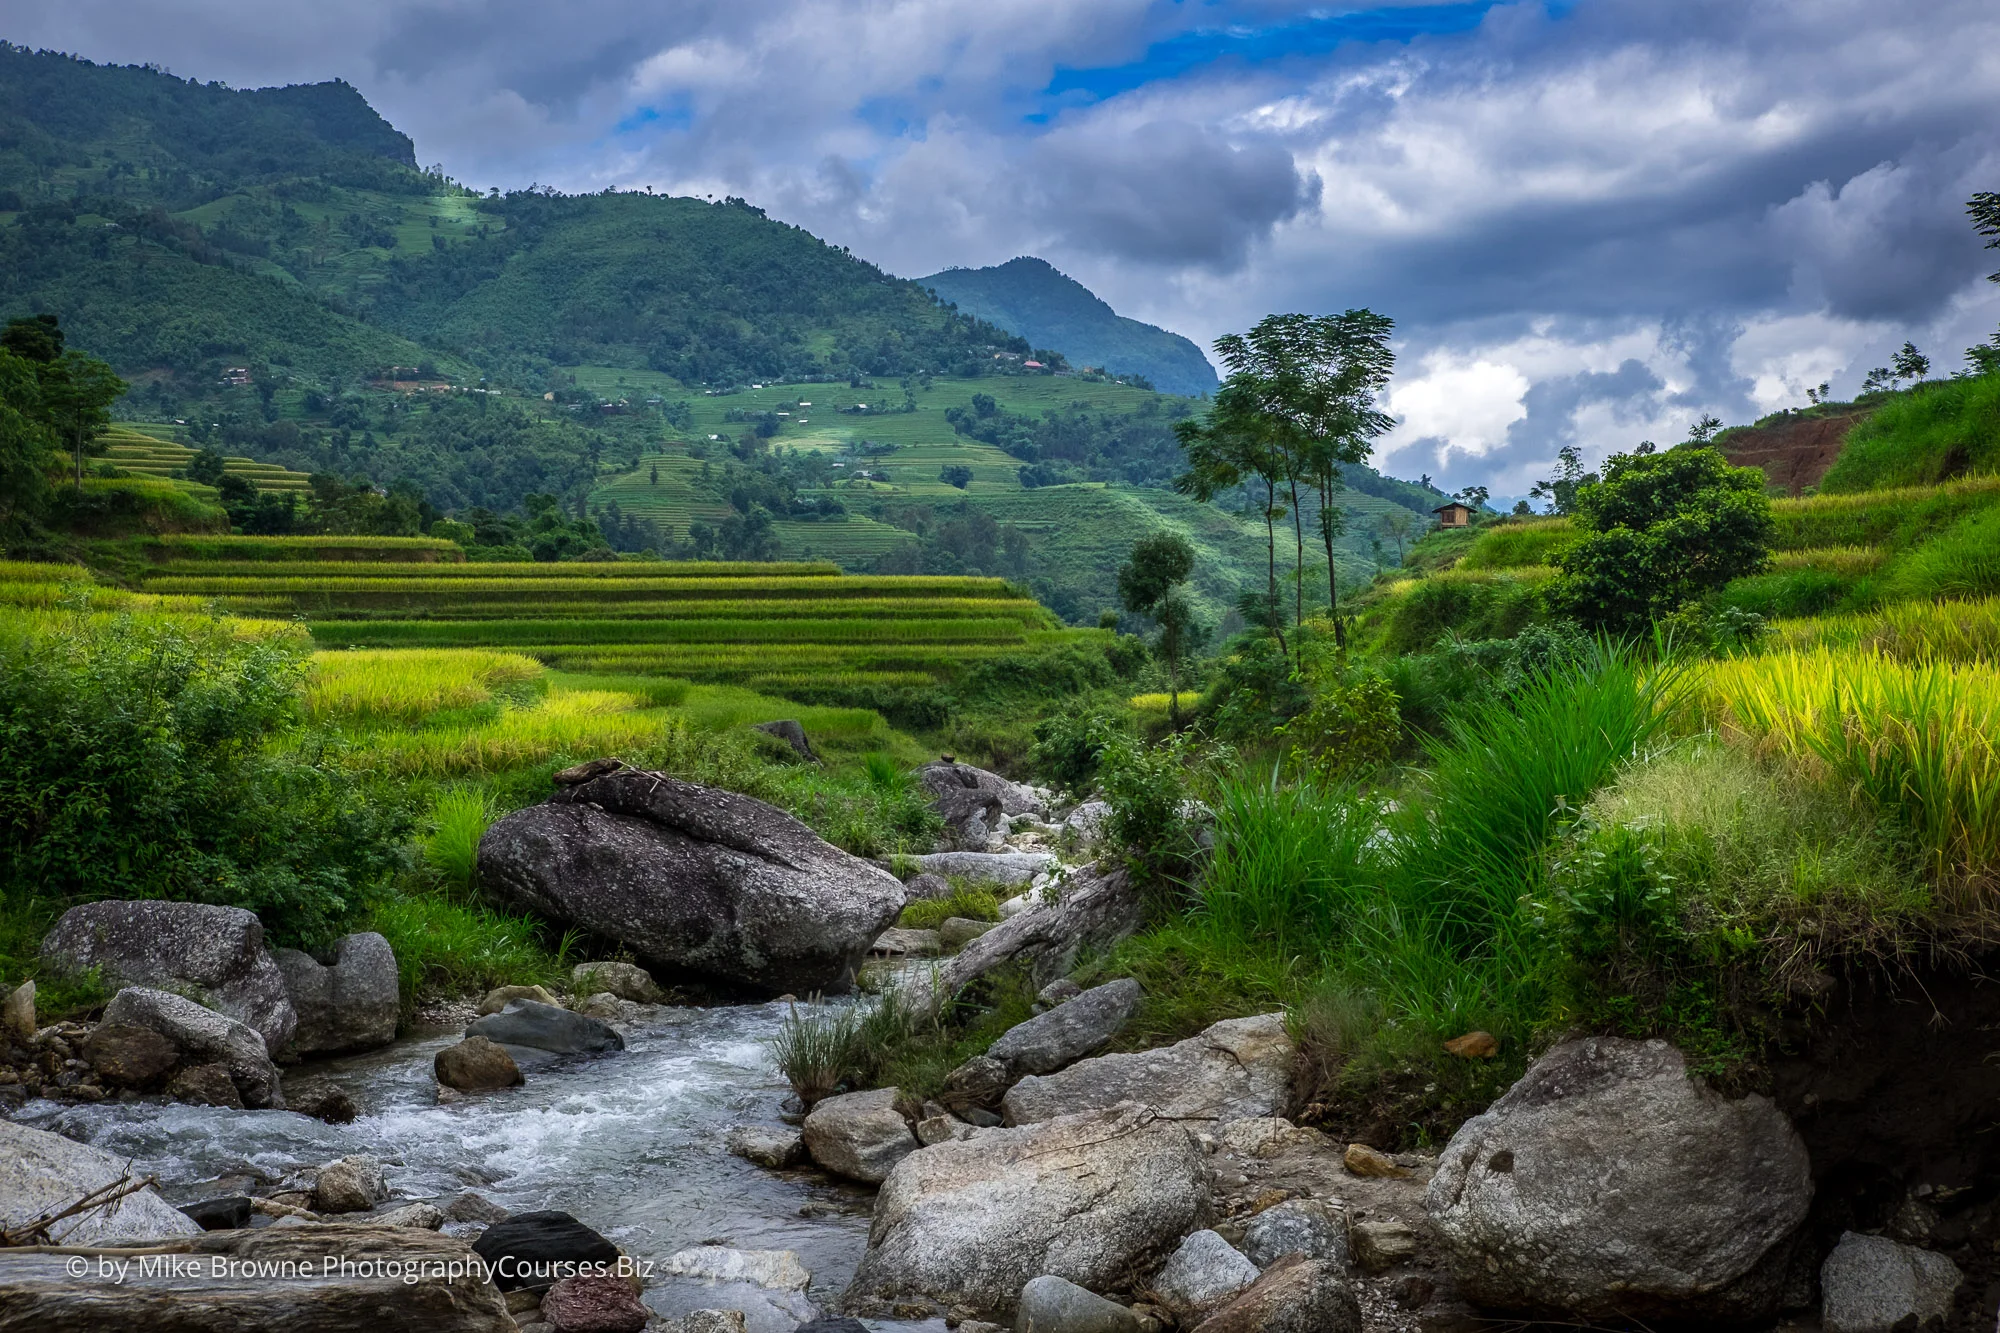 stream leading through hills and rice fields in mountains of north Vietnam